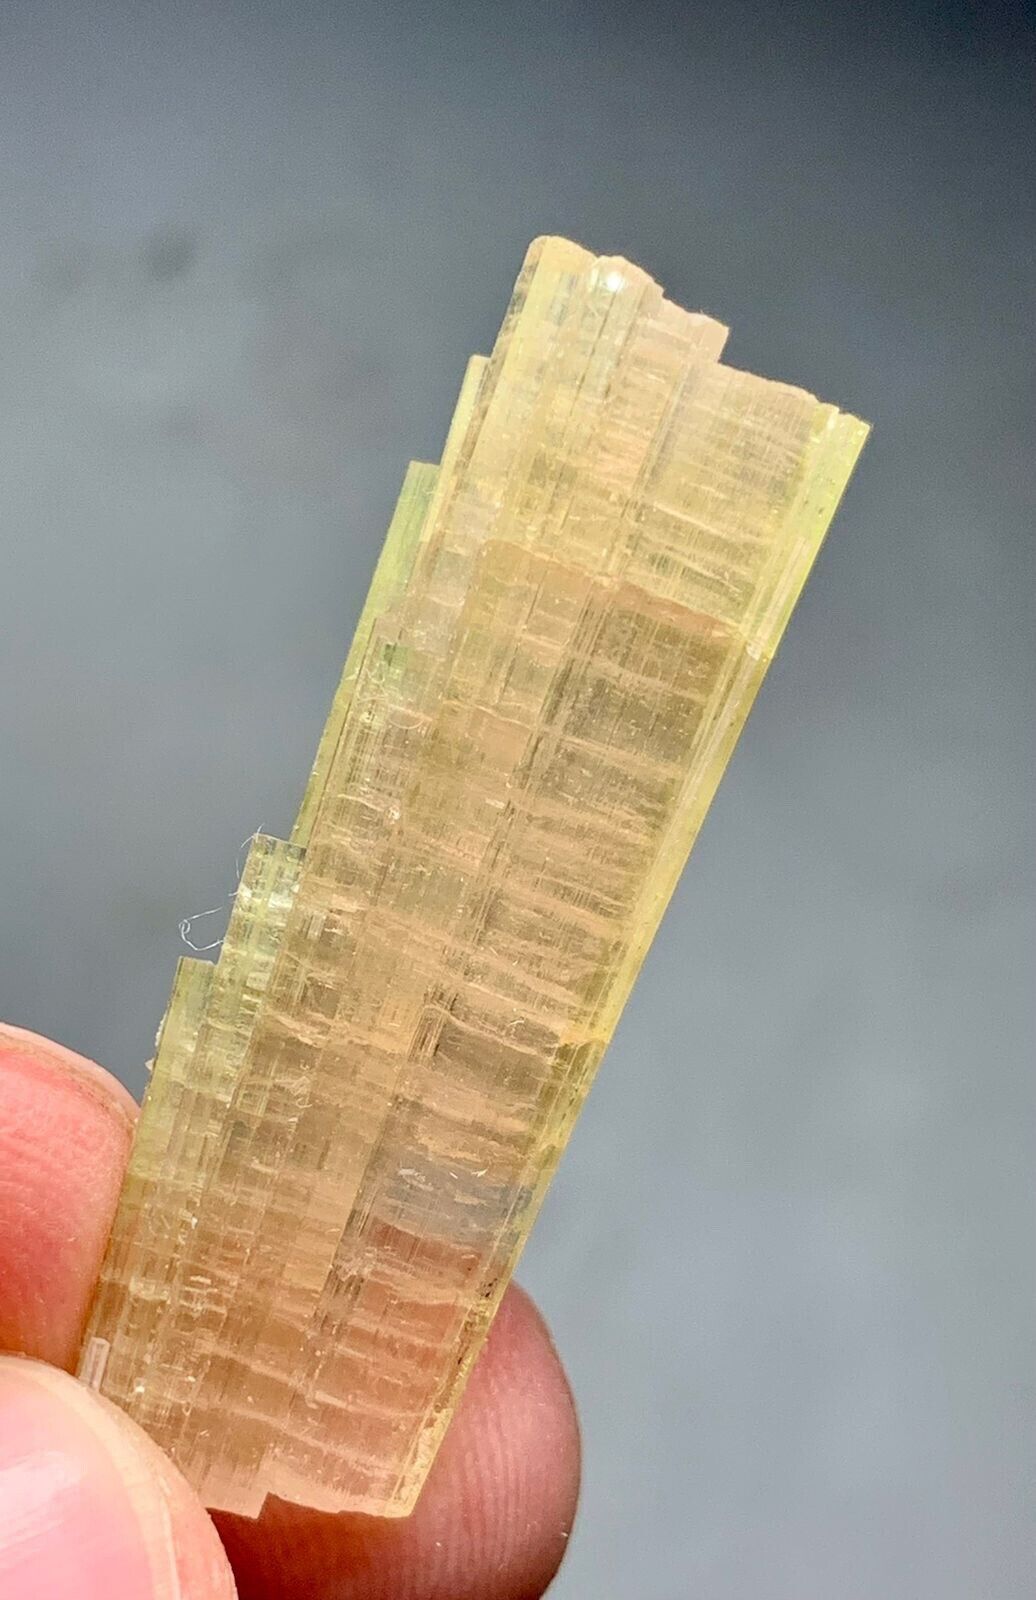 28 Cts Beautiful Termineted bi colourTourmaline Crystals bunch  from Afghanistan